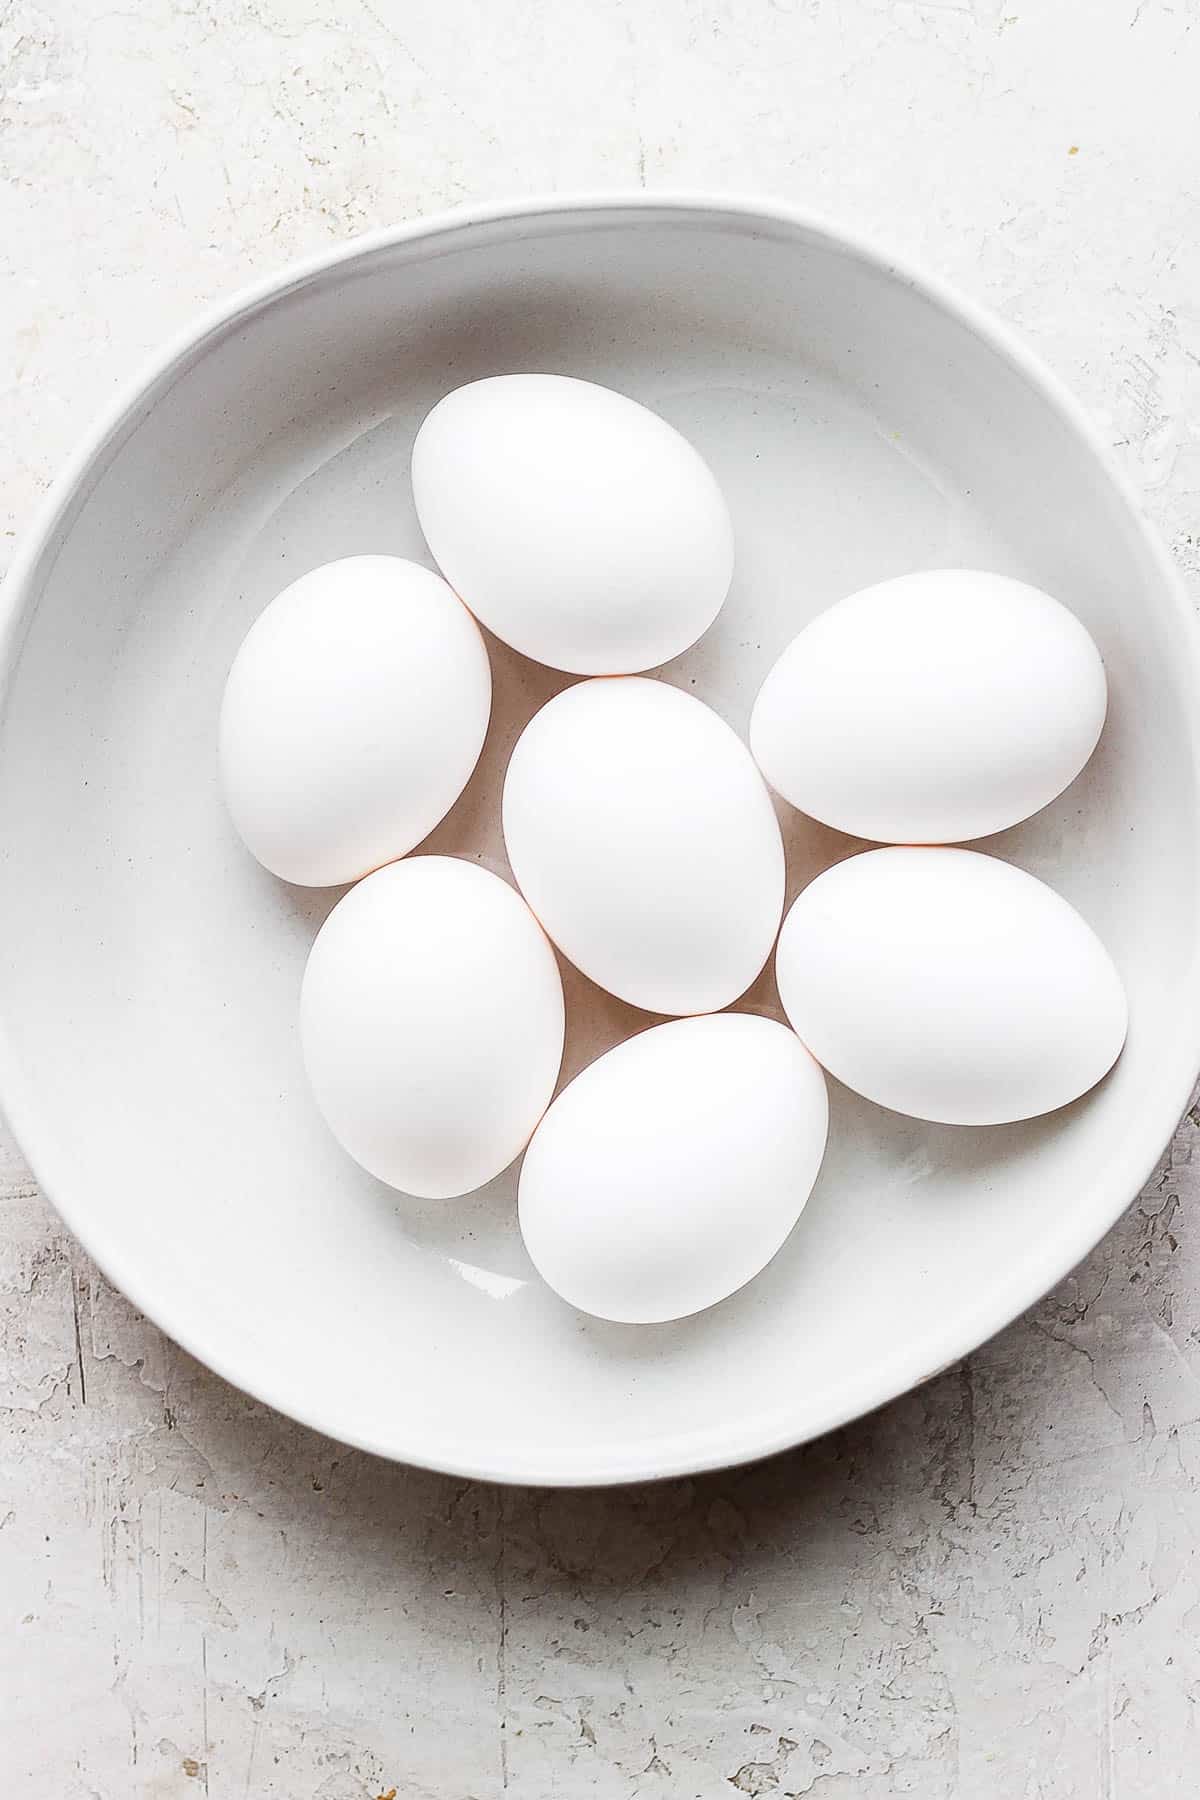 Six eggs in a shallow bowl.